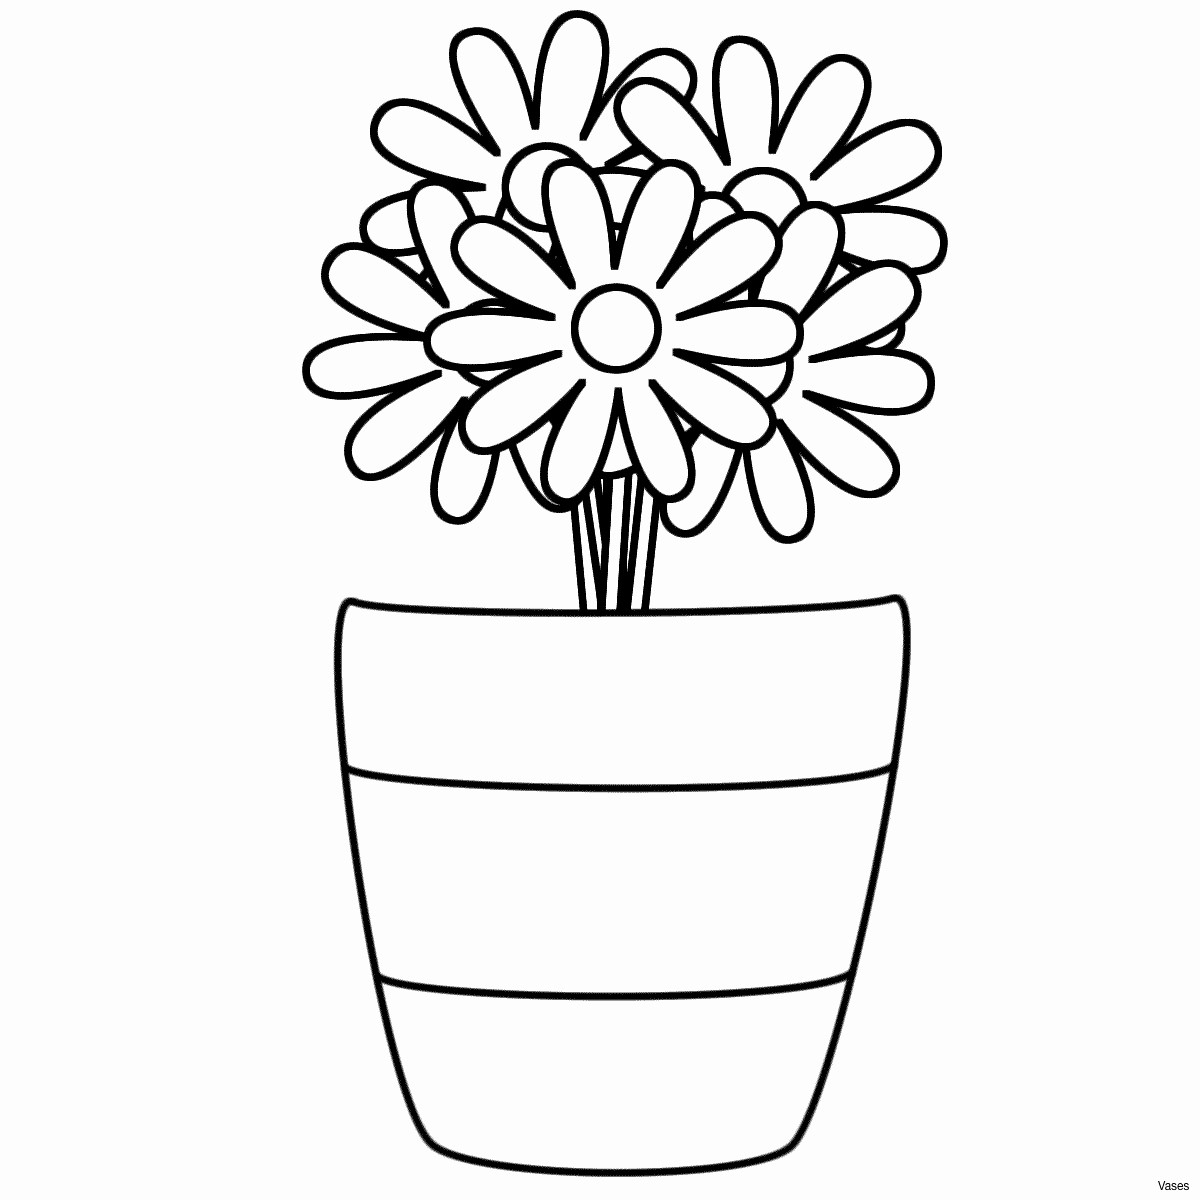 13 Fantastic Black and White Vases Cheap 2024 free download black and white vases cheap of flower color pages cool vases flower vase coloring page pages throughout flower color pages cool vases flower vase coloring page pages flowers in a top i 0d